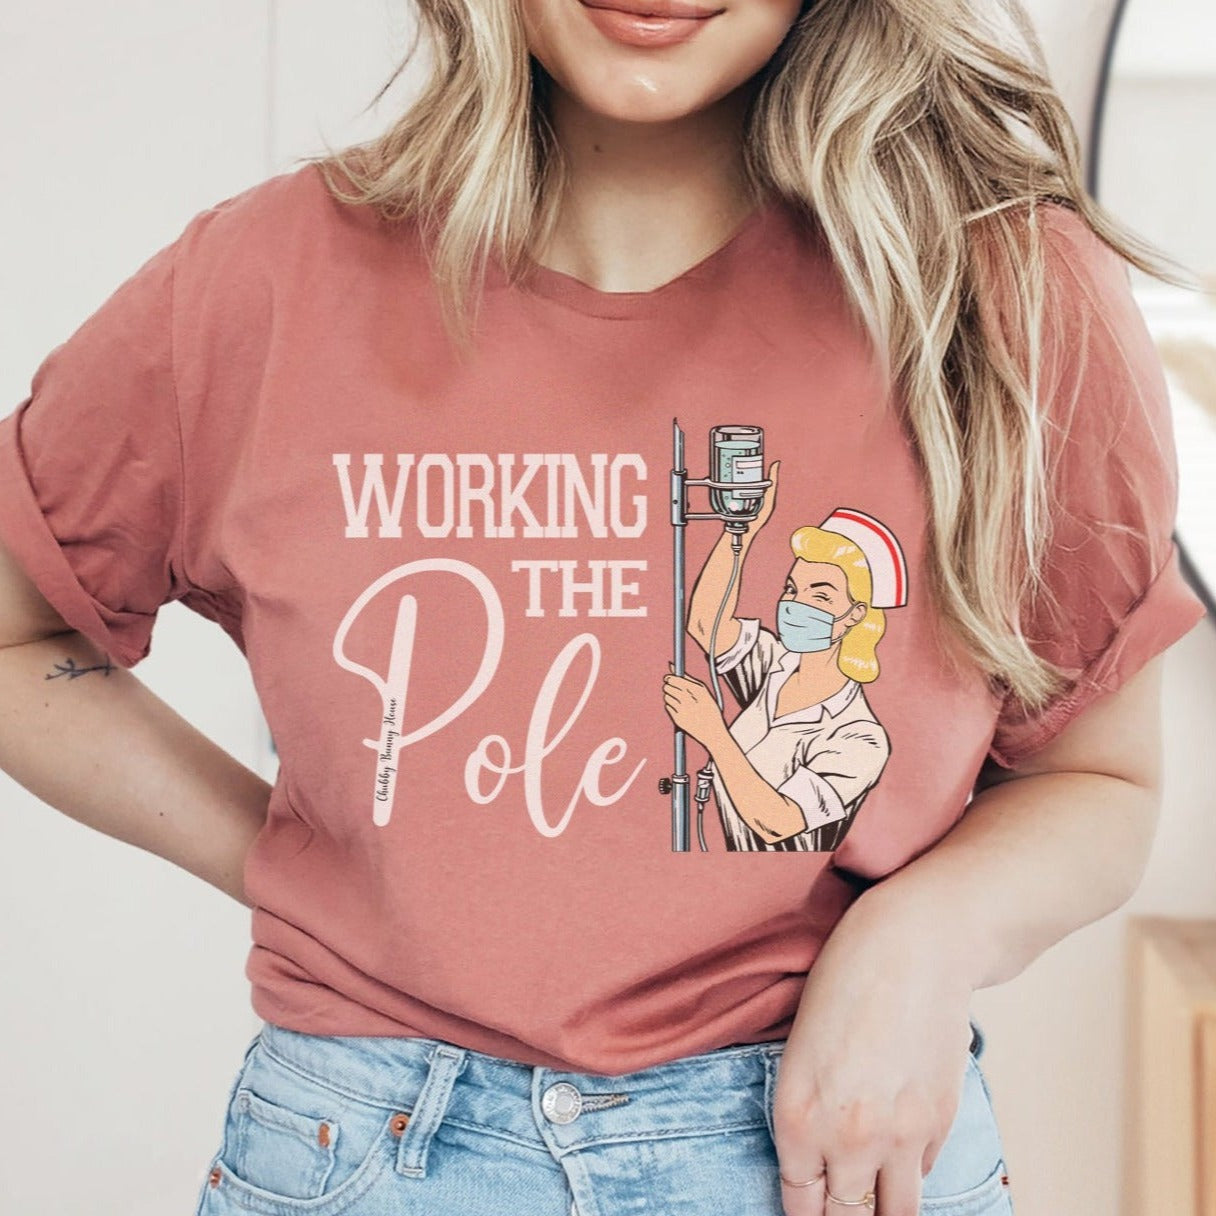 Working the (IV) Pole T-Shirt